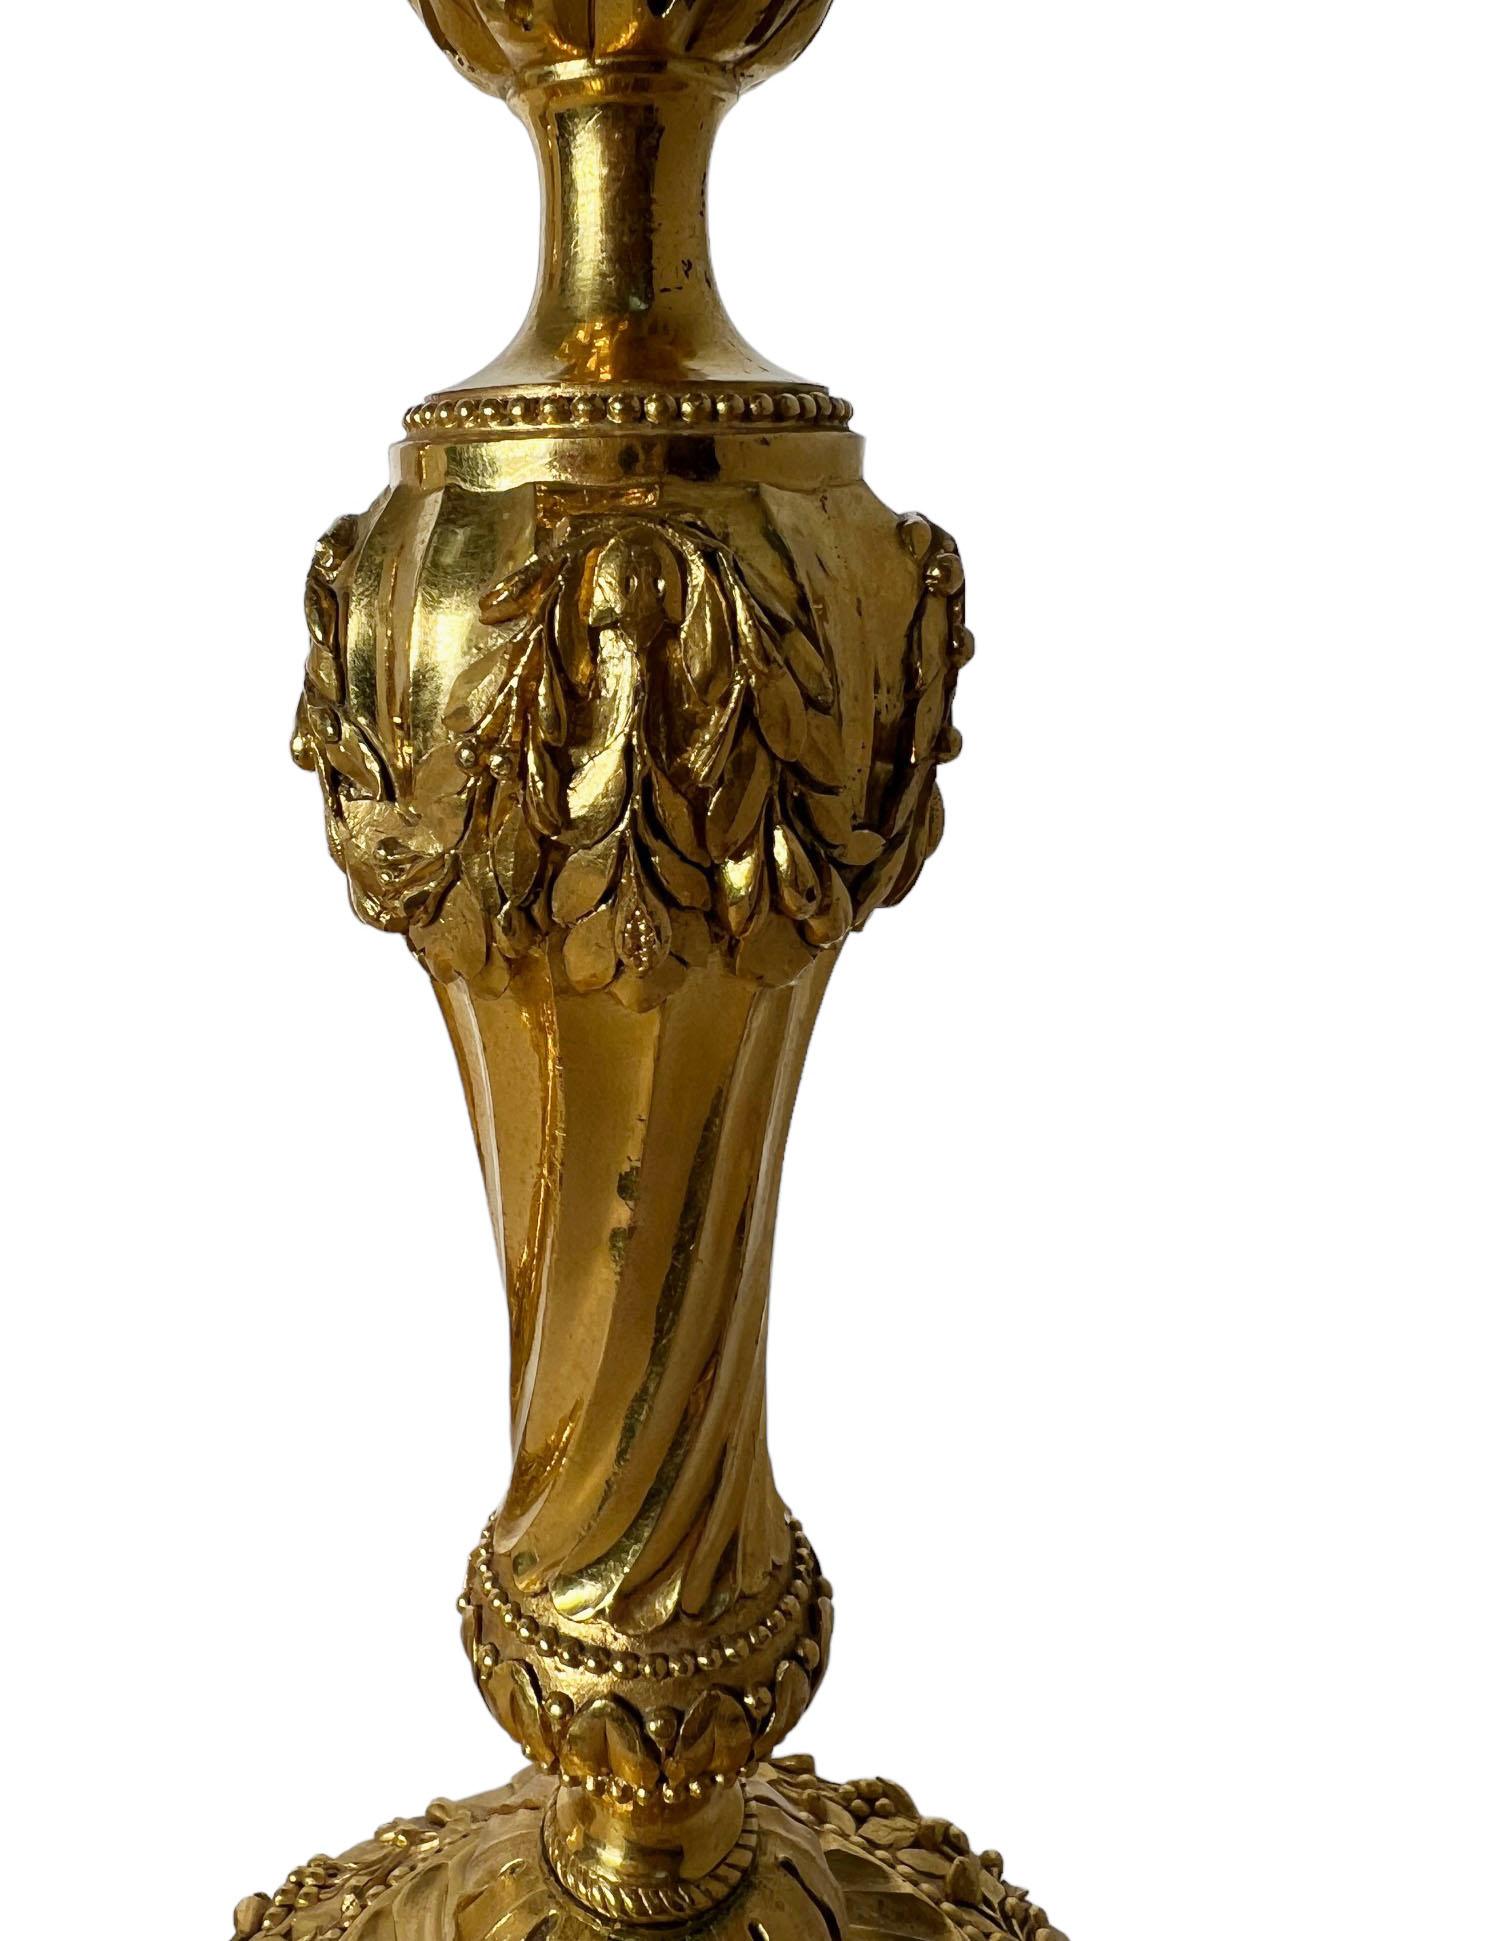 Finest quality of Christofle of gilding and bronze there is. Finely gilded with leaves and florals. Each are signed. France, 1890-1900.
